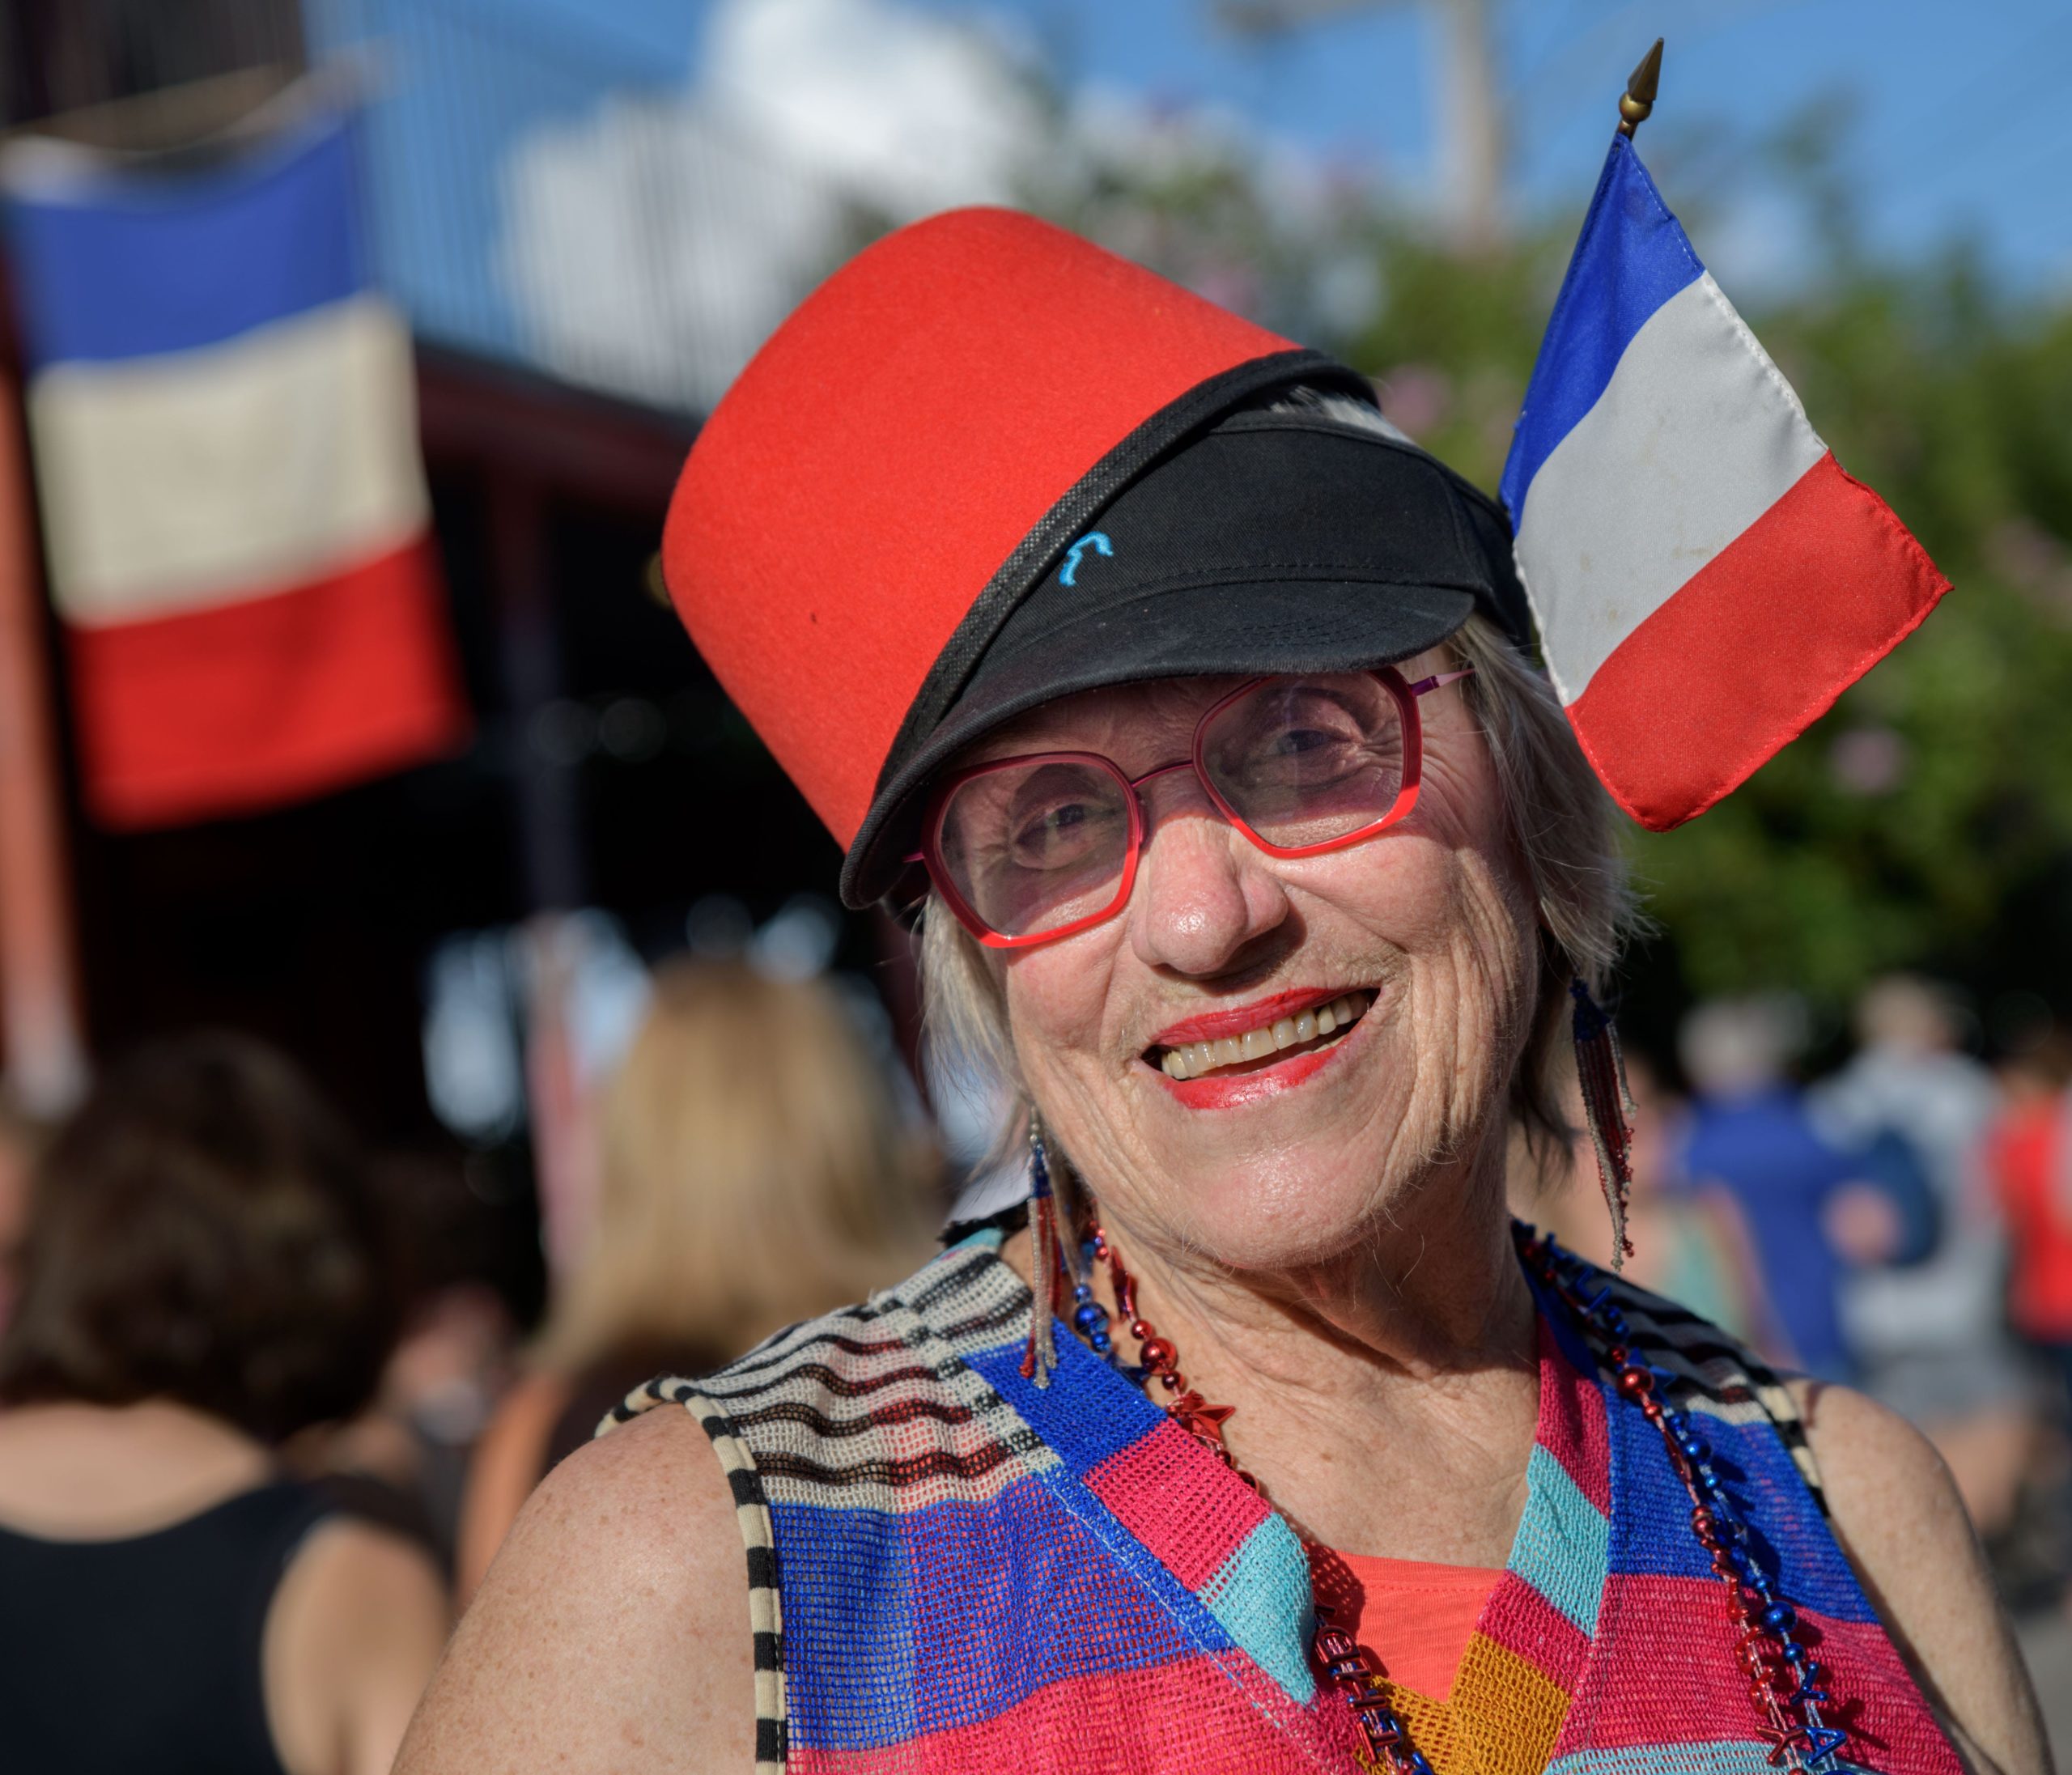 Nancy Ochsenschlager shows her support for France as she walks down Ponce de Leon Street for the 13th Annual Faubourg St. John Bastille Day Block Party in New Orleans, La. Saturday, July 27, 2019. Originally scheduled for Bastille Day, July 14, 2019, the event was moved because of the approach of Hurricane Barry.  The event is put on by local merchants including Pal's Lounge, Cafe Degas, 1000 Figs, Catty Shack, the Faubourg St. John Neighborhood Association, the French American Chamber of Commerce Gulf Coast Chapter, Liuzzas by the Track, Nonna Mia, Lolas, Santa Fe, Swirl Wines and Toast Cafe. Bastille Day celebrates the French National Day and the storming of the Bastille fortress and political prison on July 14, 1789. Photo by Matthew Hinton